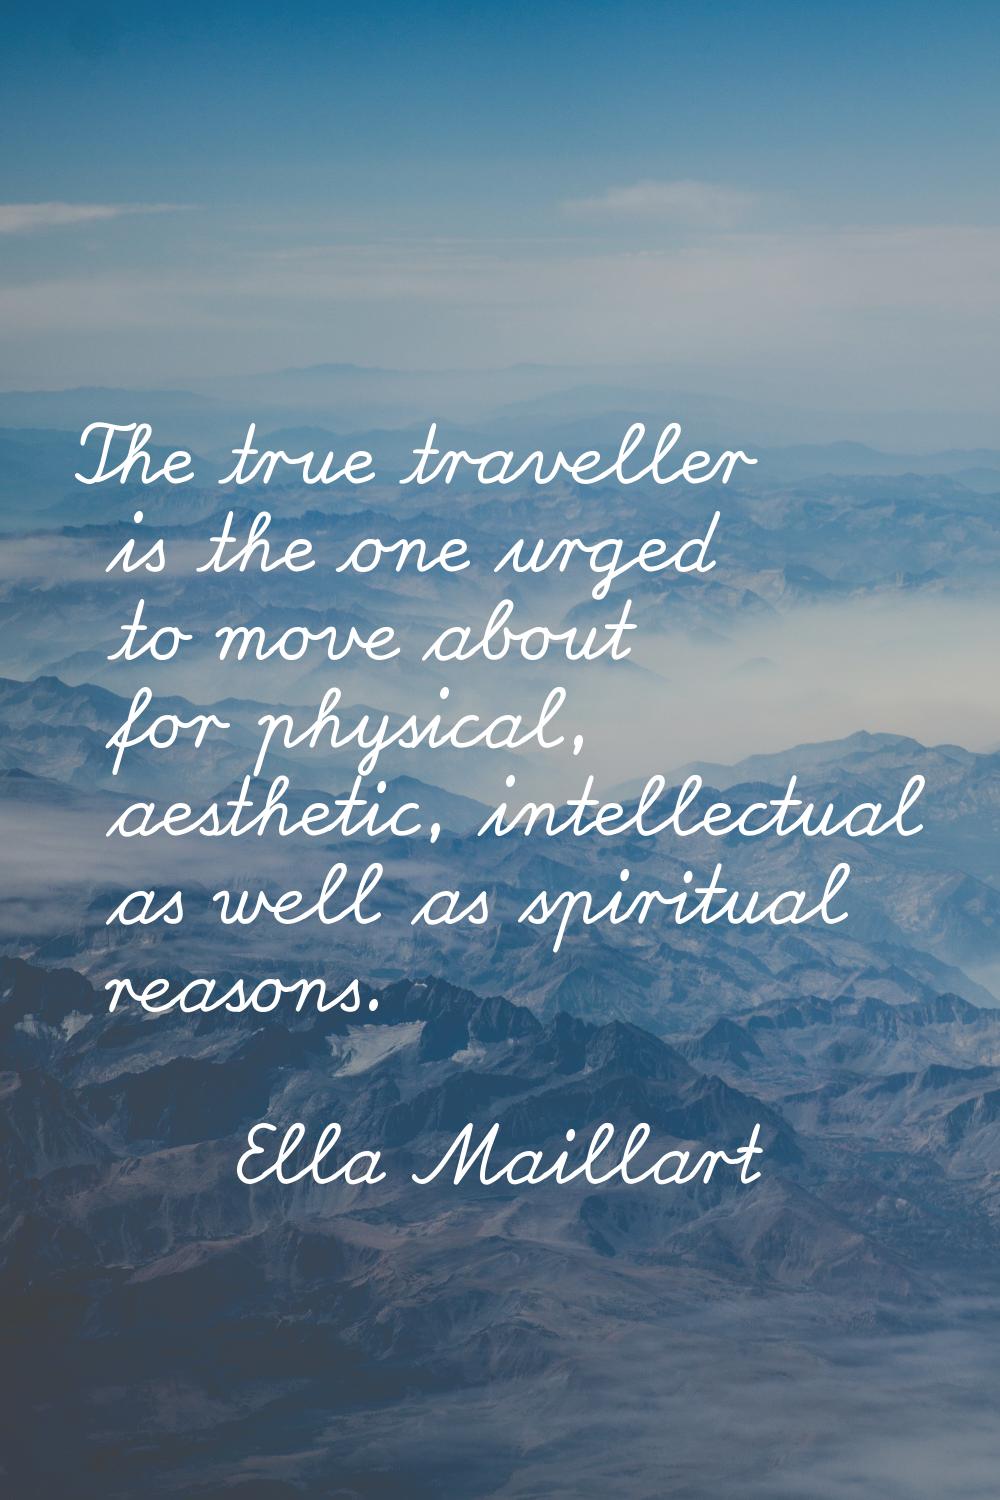 The true traveller is the one urged to move about for physical, aesthetic, intellectual as well as 